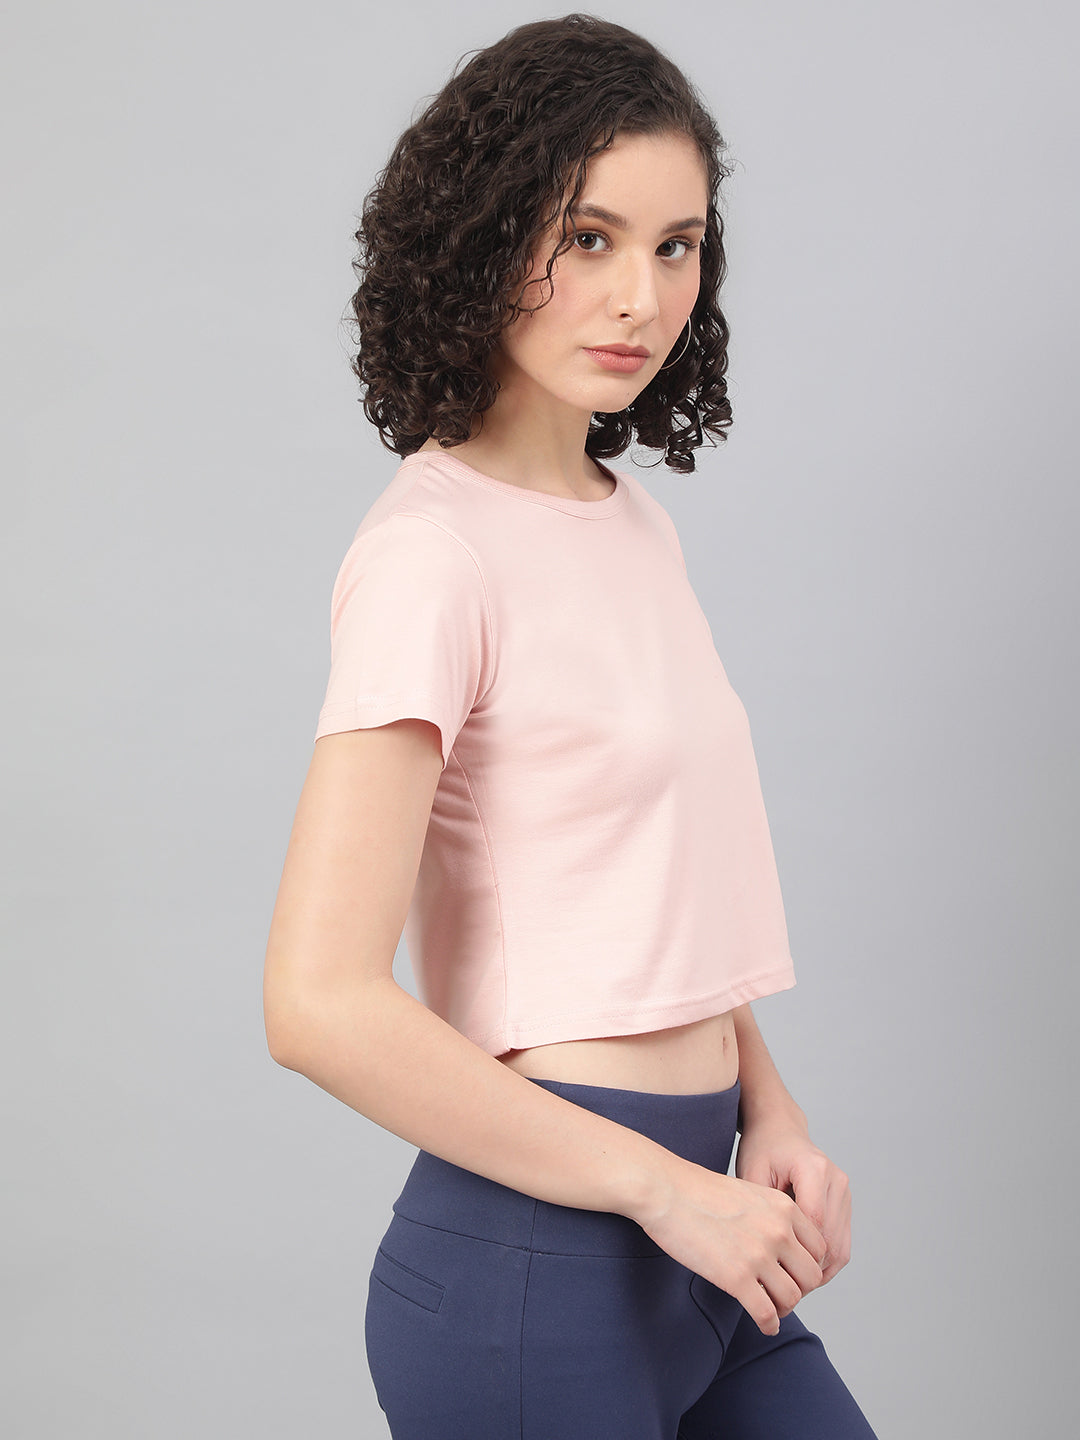 Supima Cotton Pink Color T-shirts for women - BeSimple